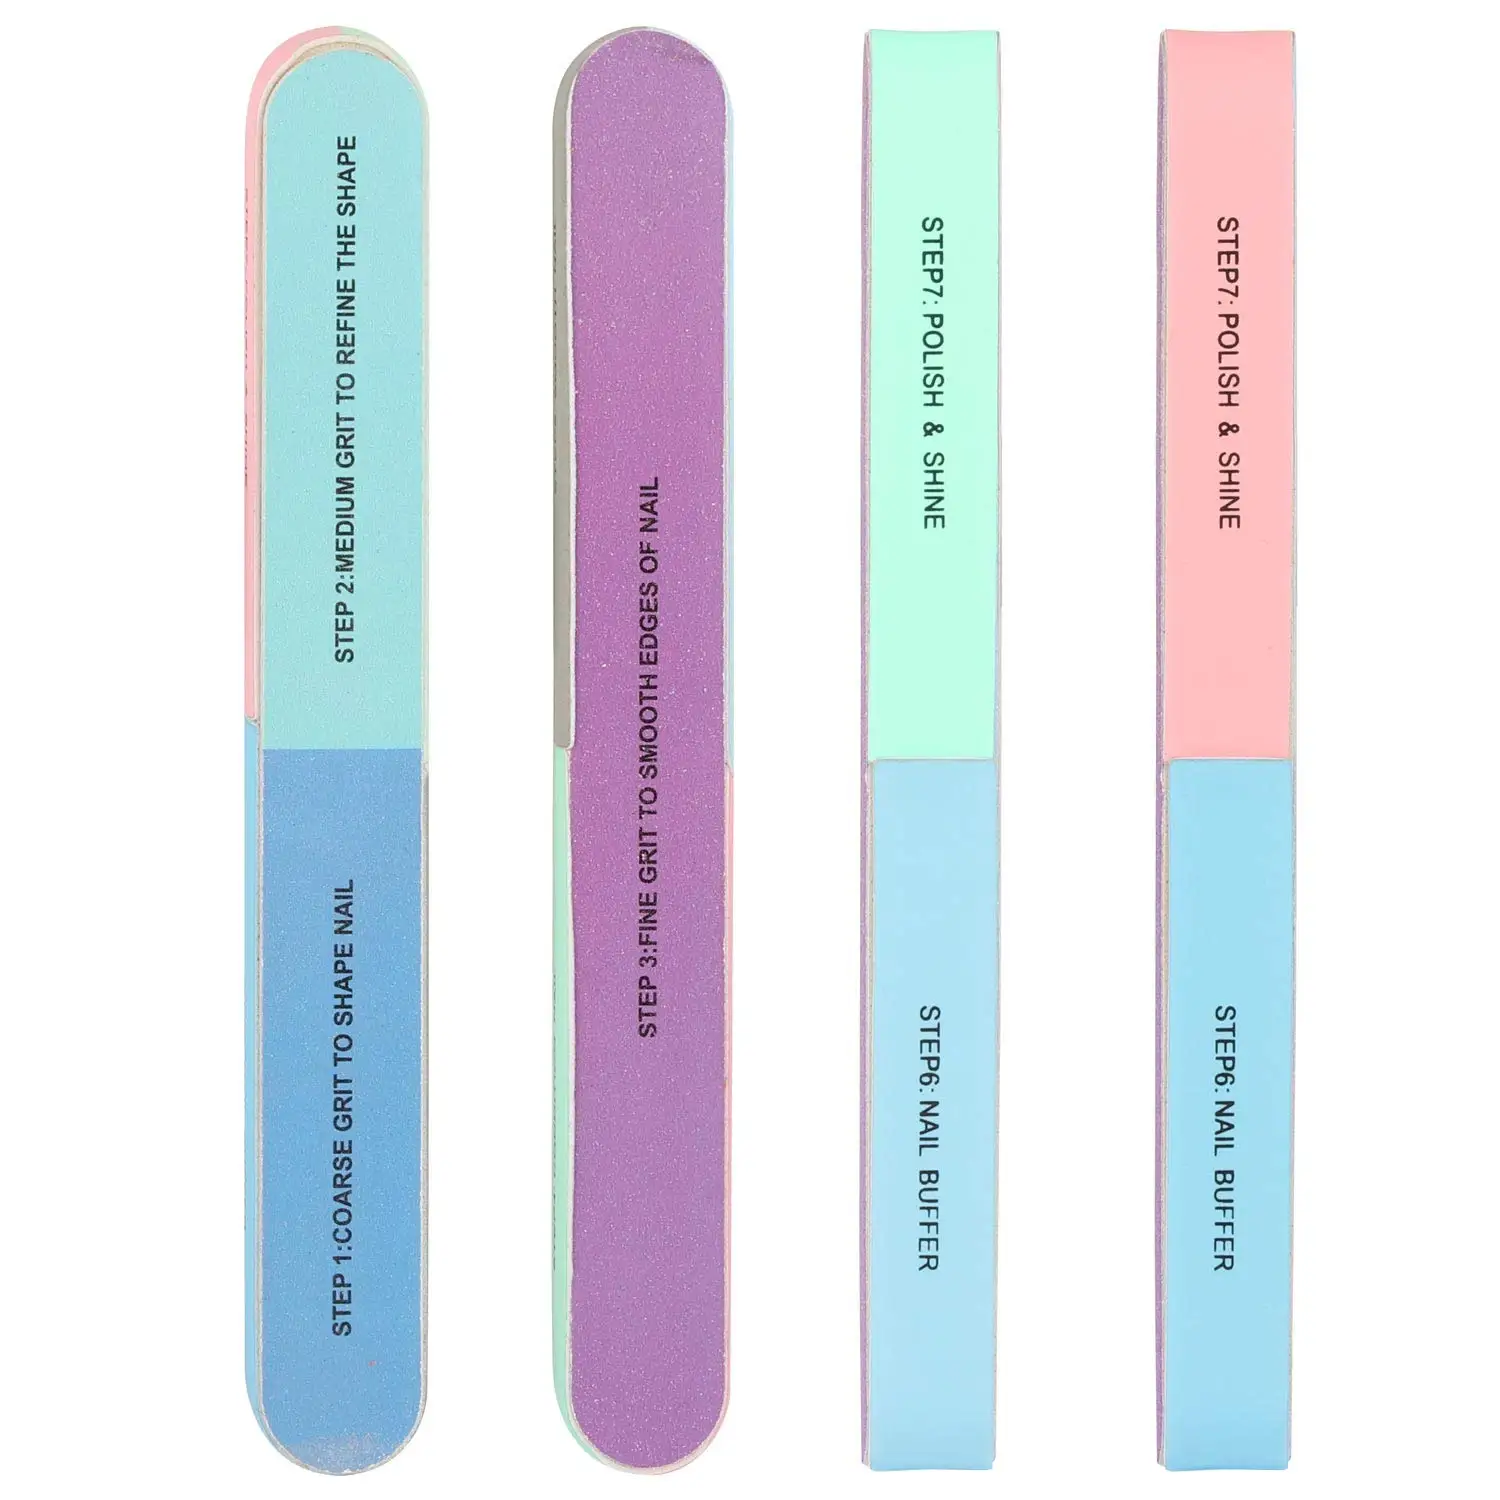 Cosmetic Nail Buffer Manicure Pedicure 7way Nail File Emery Board Grit Nail  Files For Manicure Remover Tool - Buy Nail Files,Nail Sponge File,Nail  Buffer Product on 